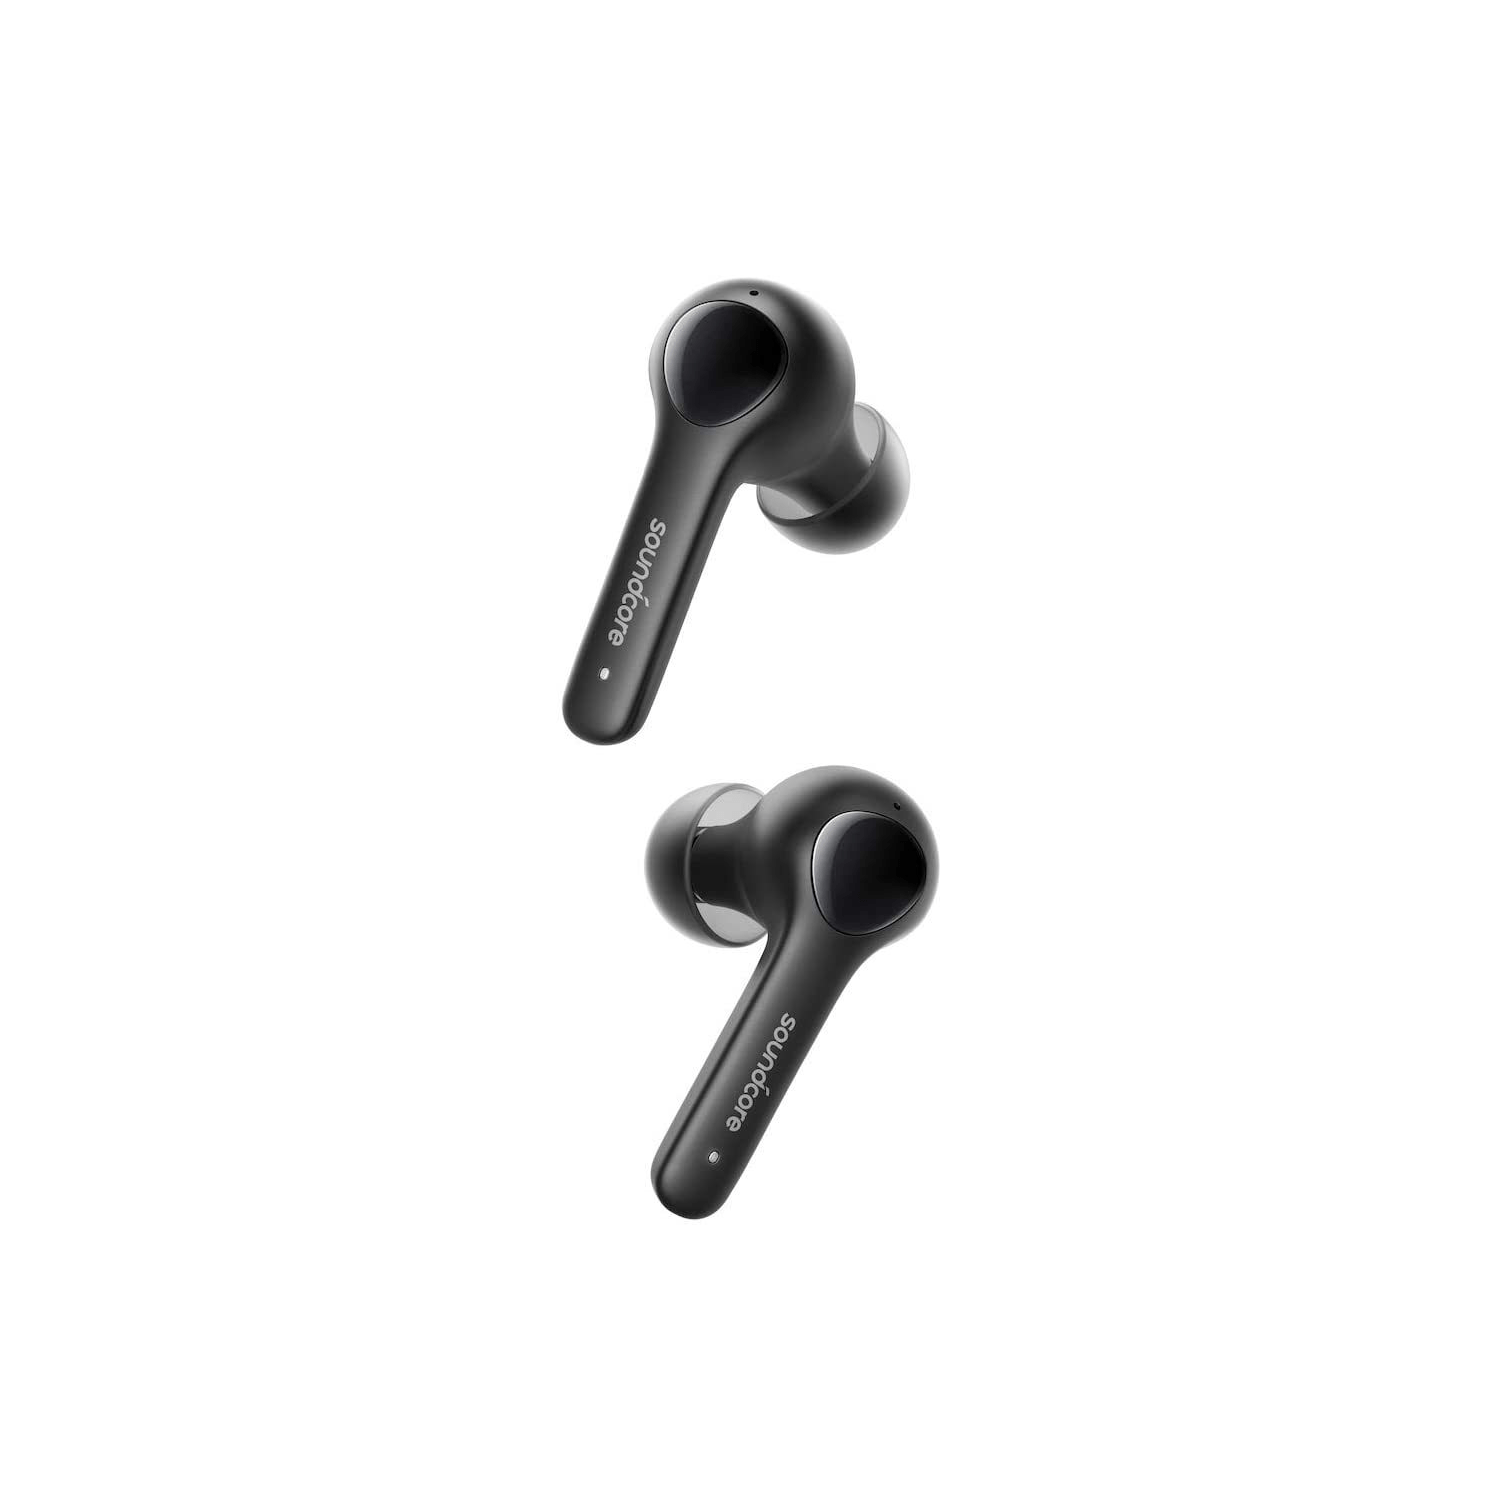 Anker SoundCore Life Note Total Wireless Earbuds Black